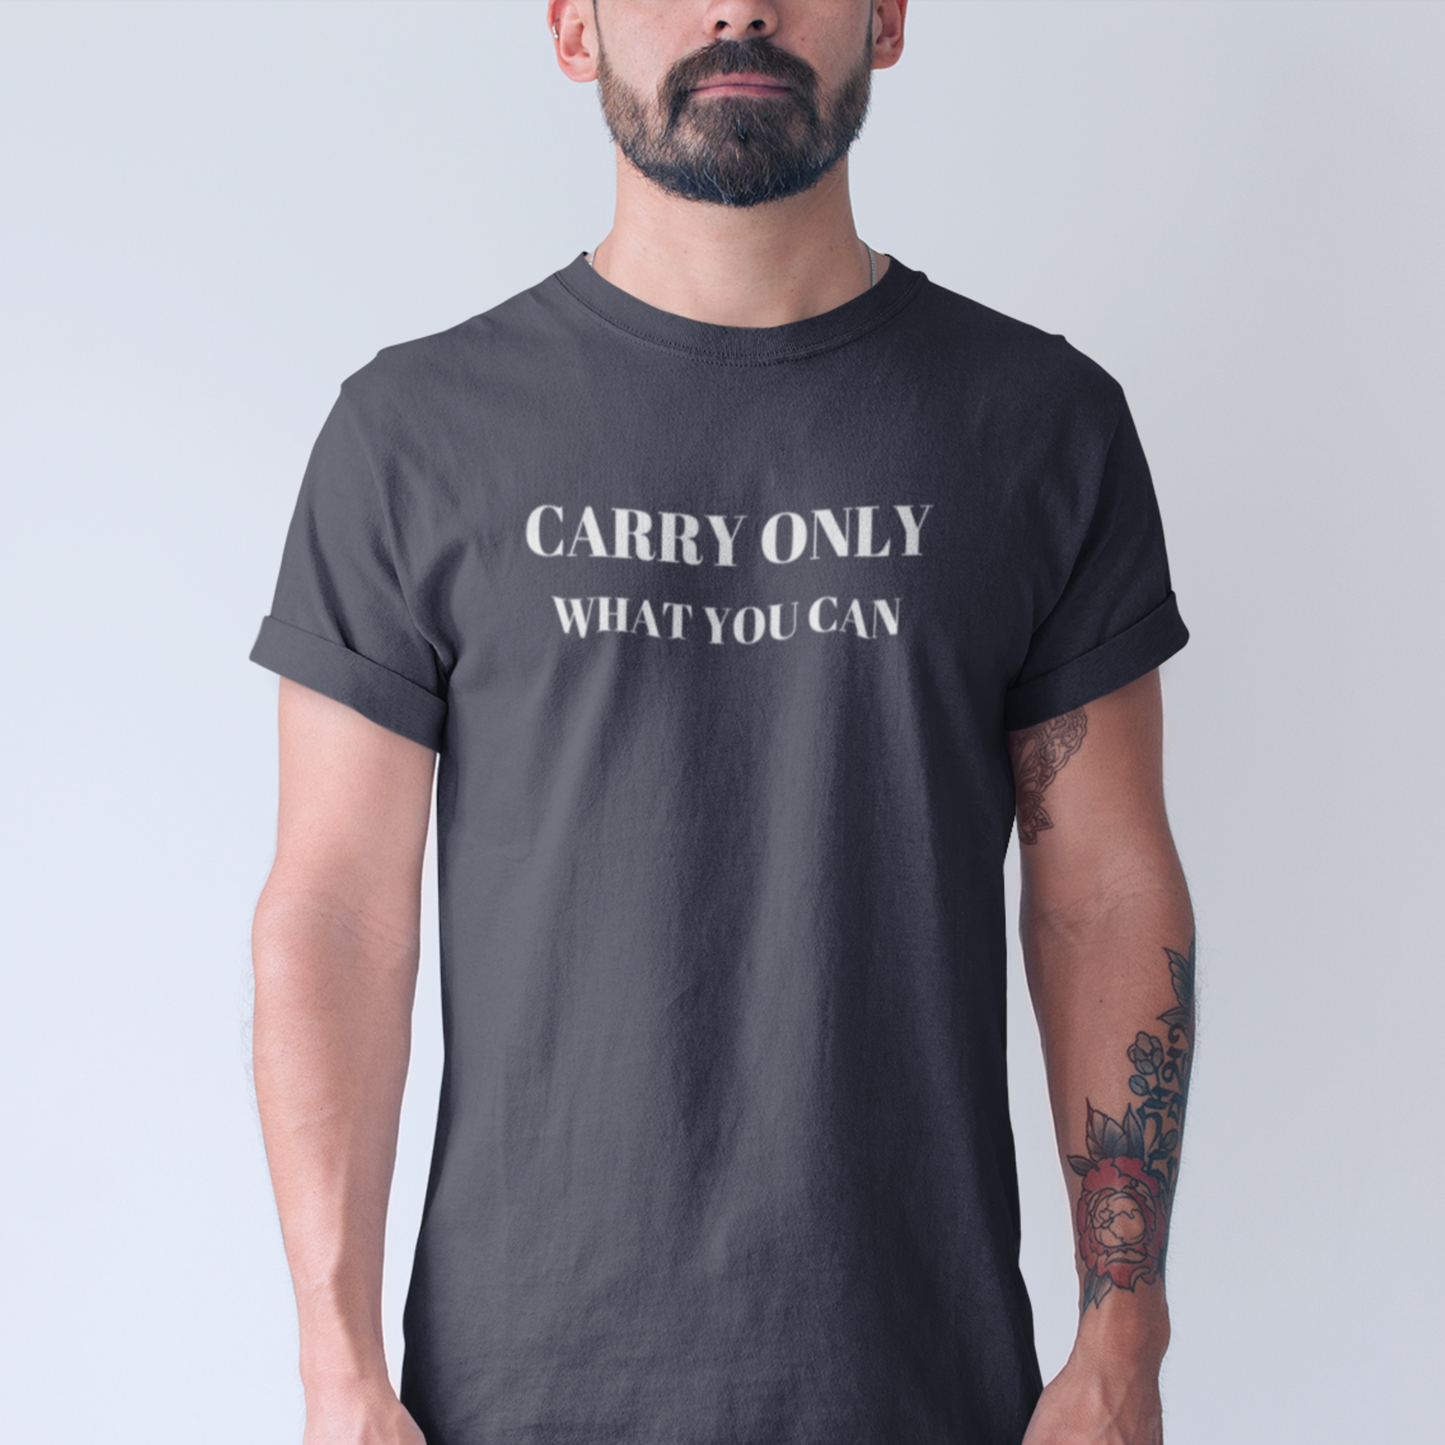 Carry only what you can Inspirational words t shirt gift